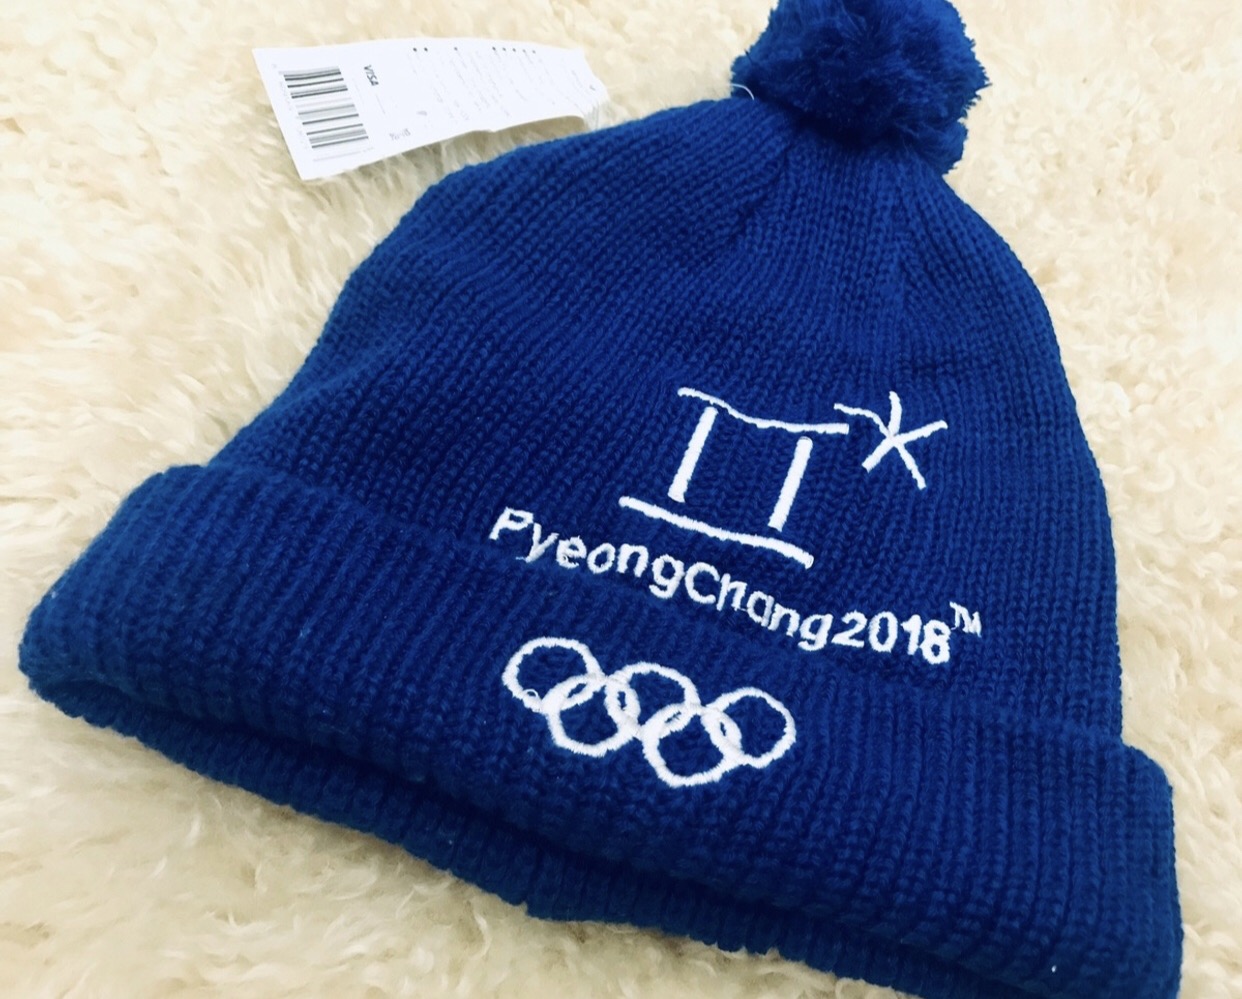 Vintage - Olympic 2018 Pyeong Chang Beanie Hat - 2